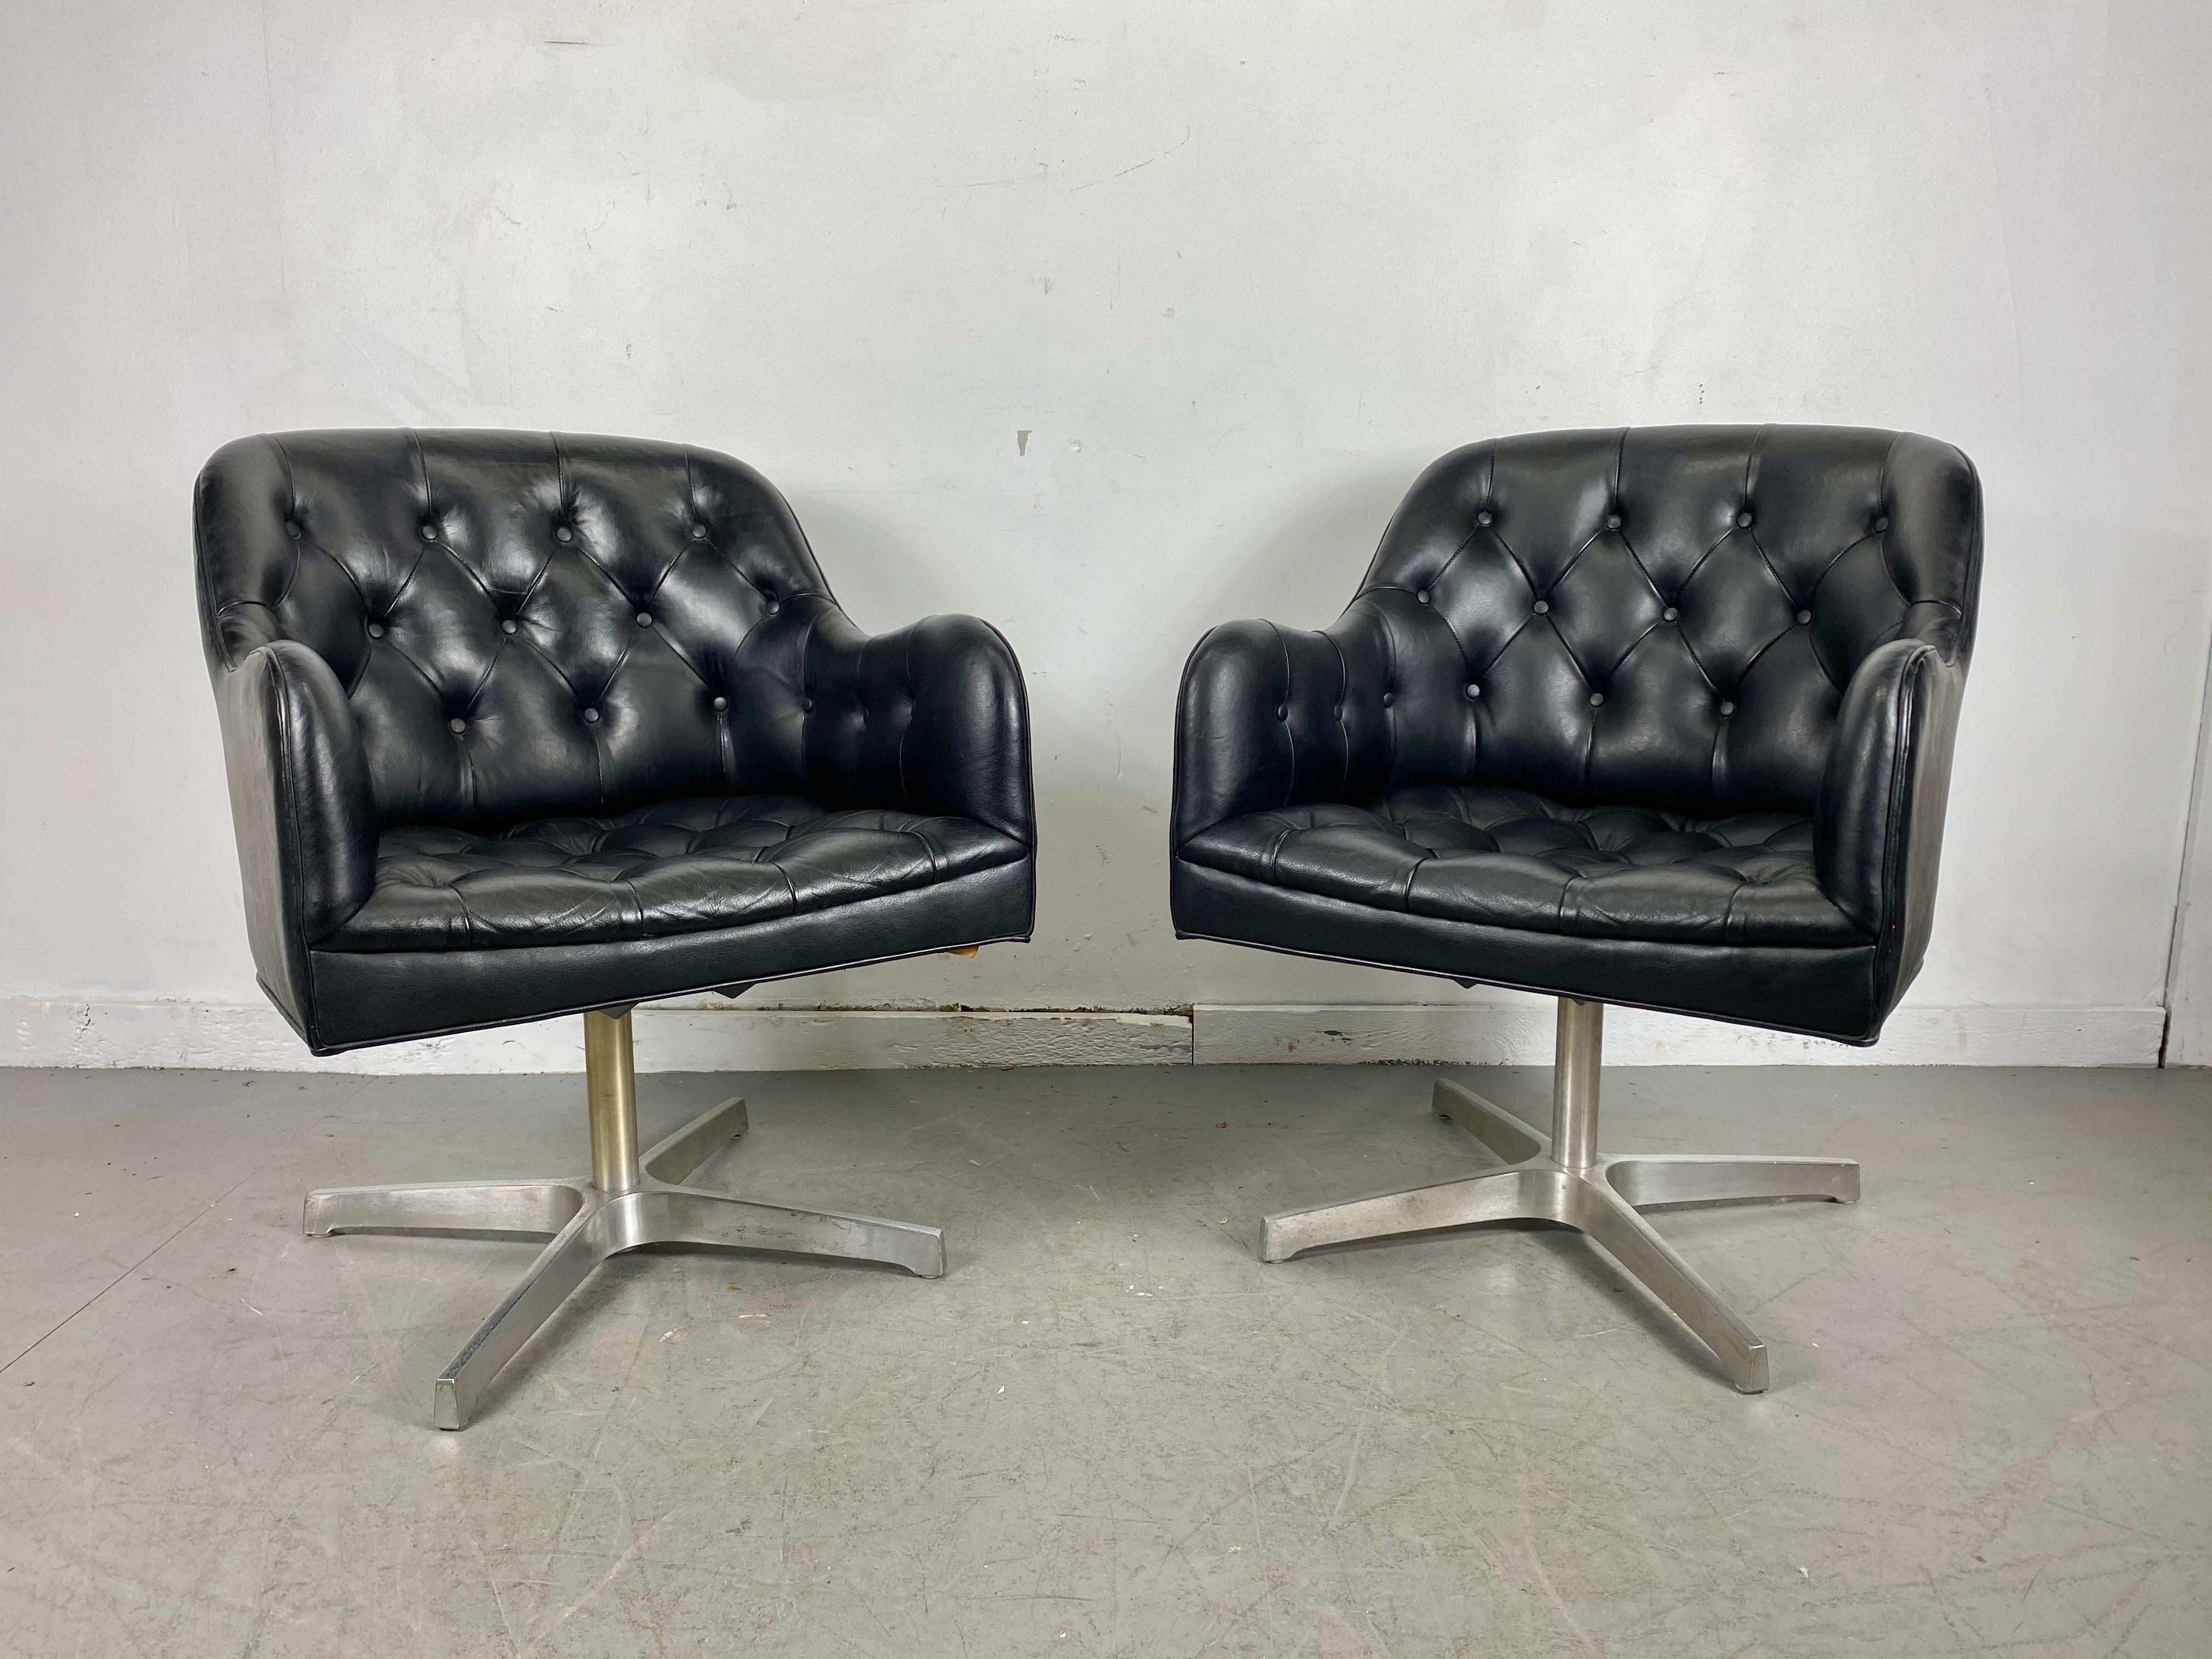 Mid-Century Modern Stunning Black Button Tufted Leather Swivel Chairs, Jens Risom for Marble, Pair For Sale